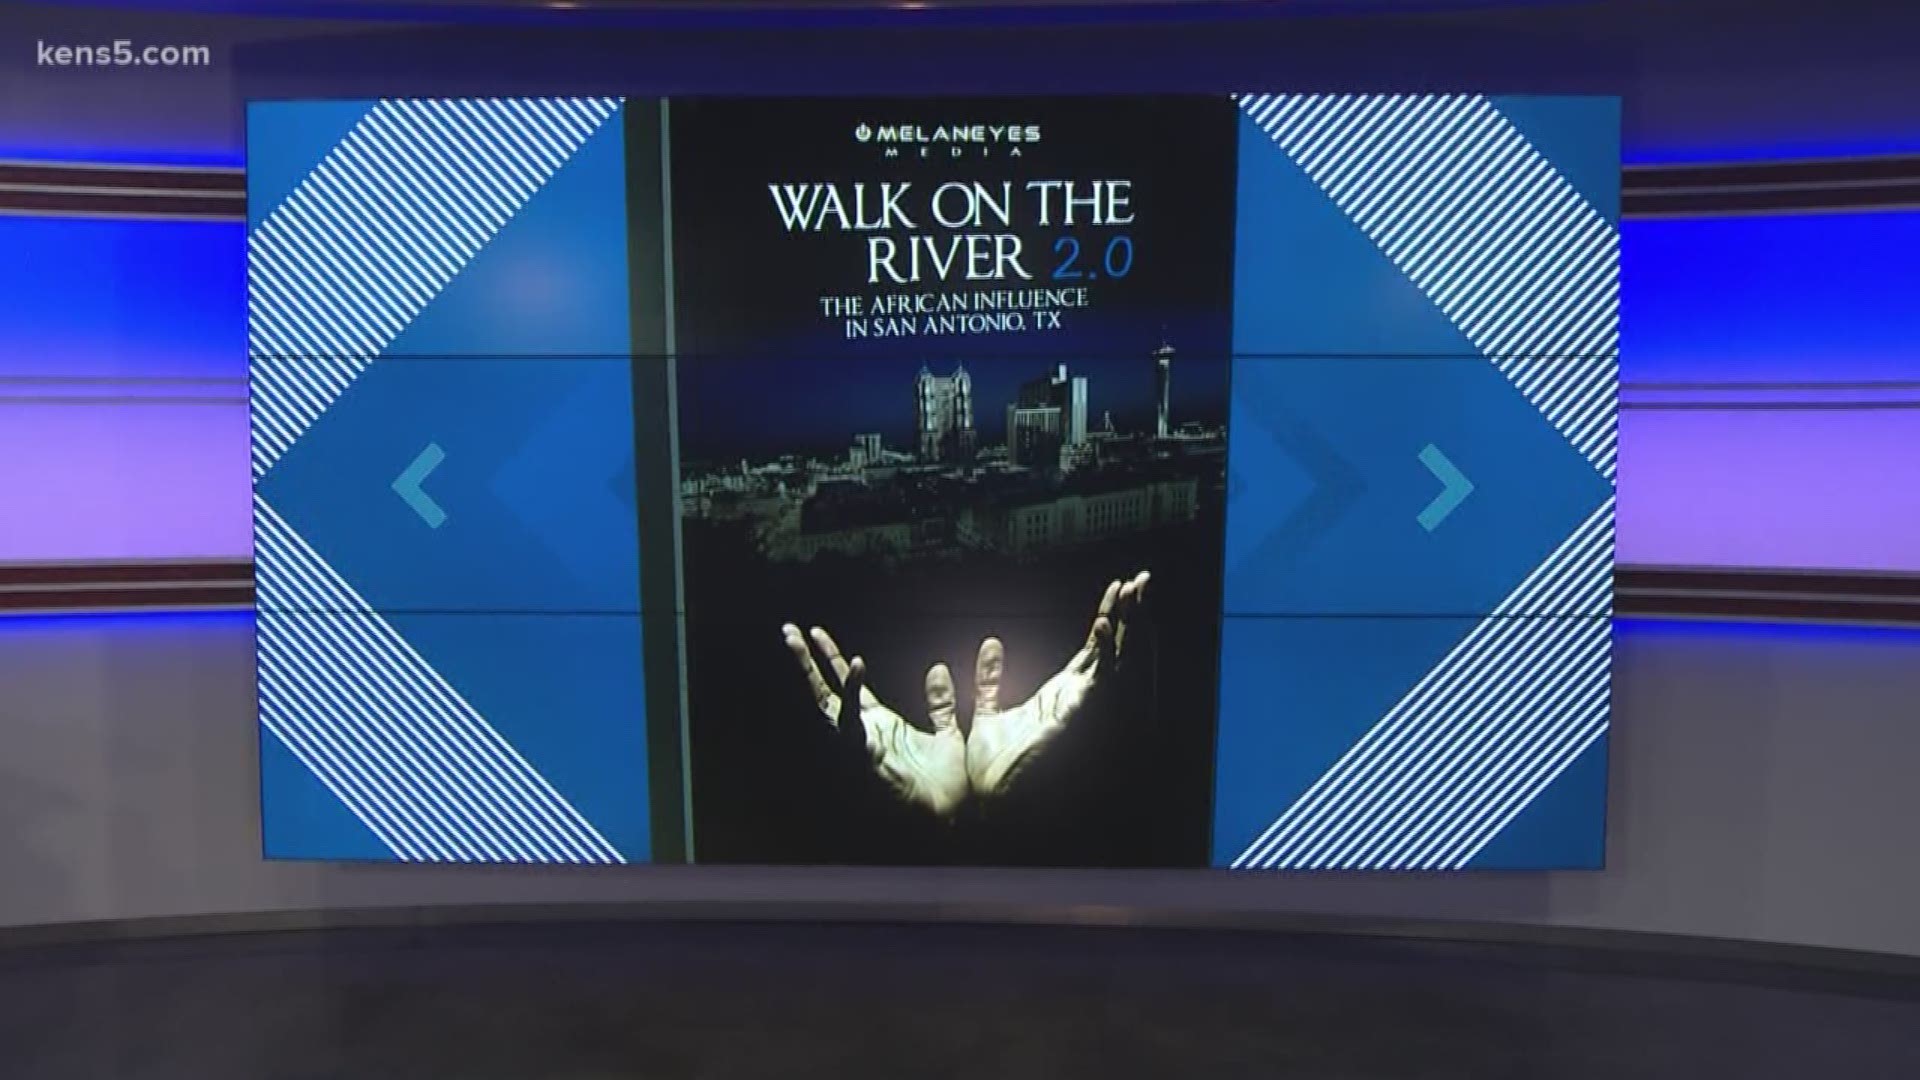 Joining us now are the filmmakers of "Walk on the River 2.0"